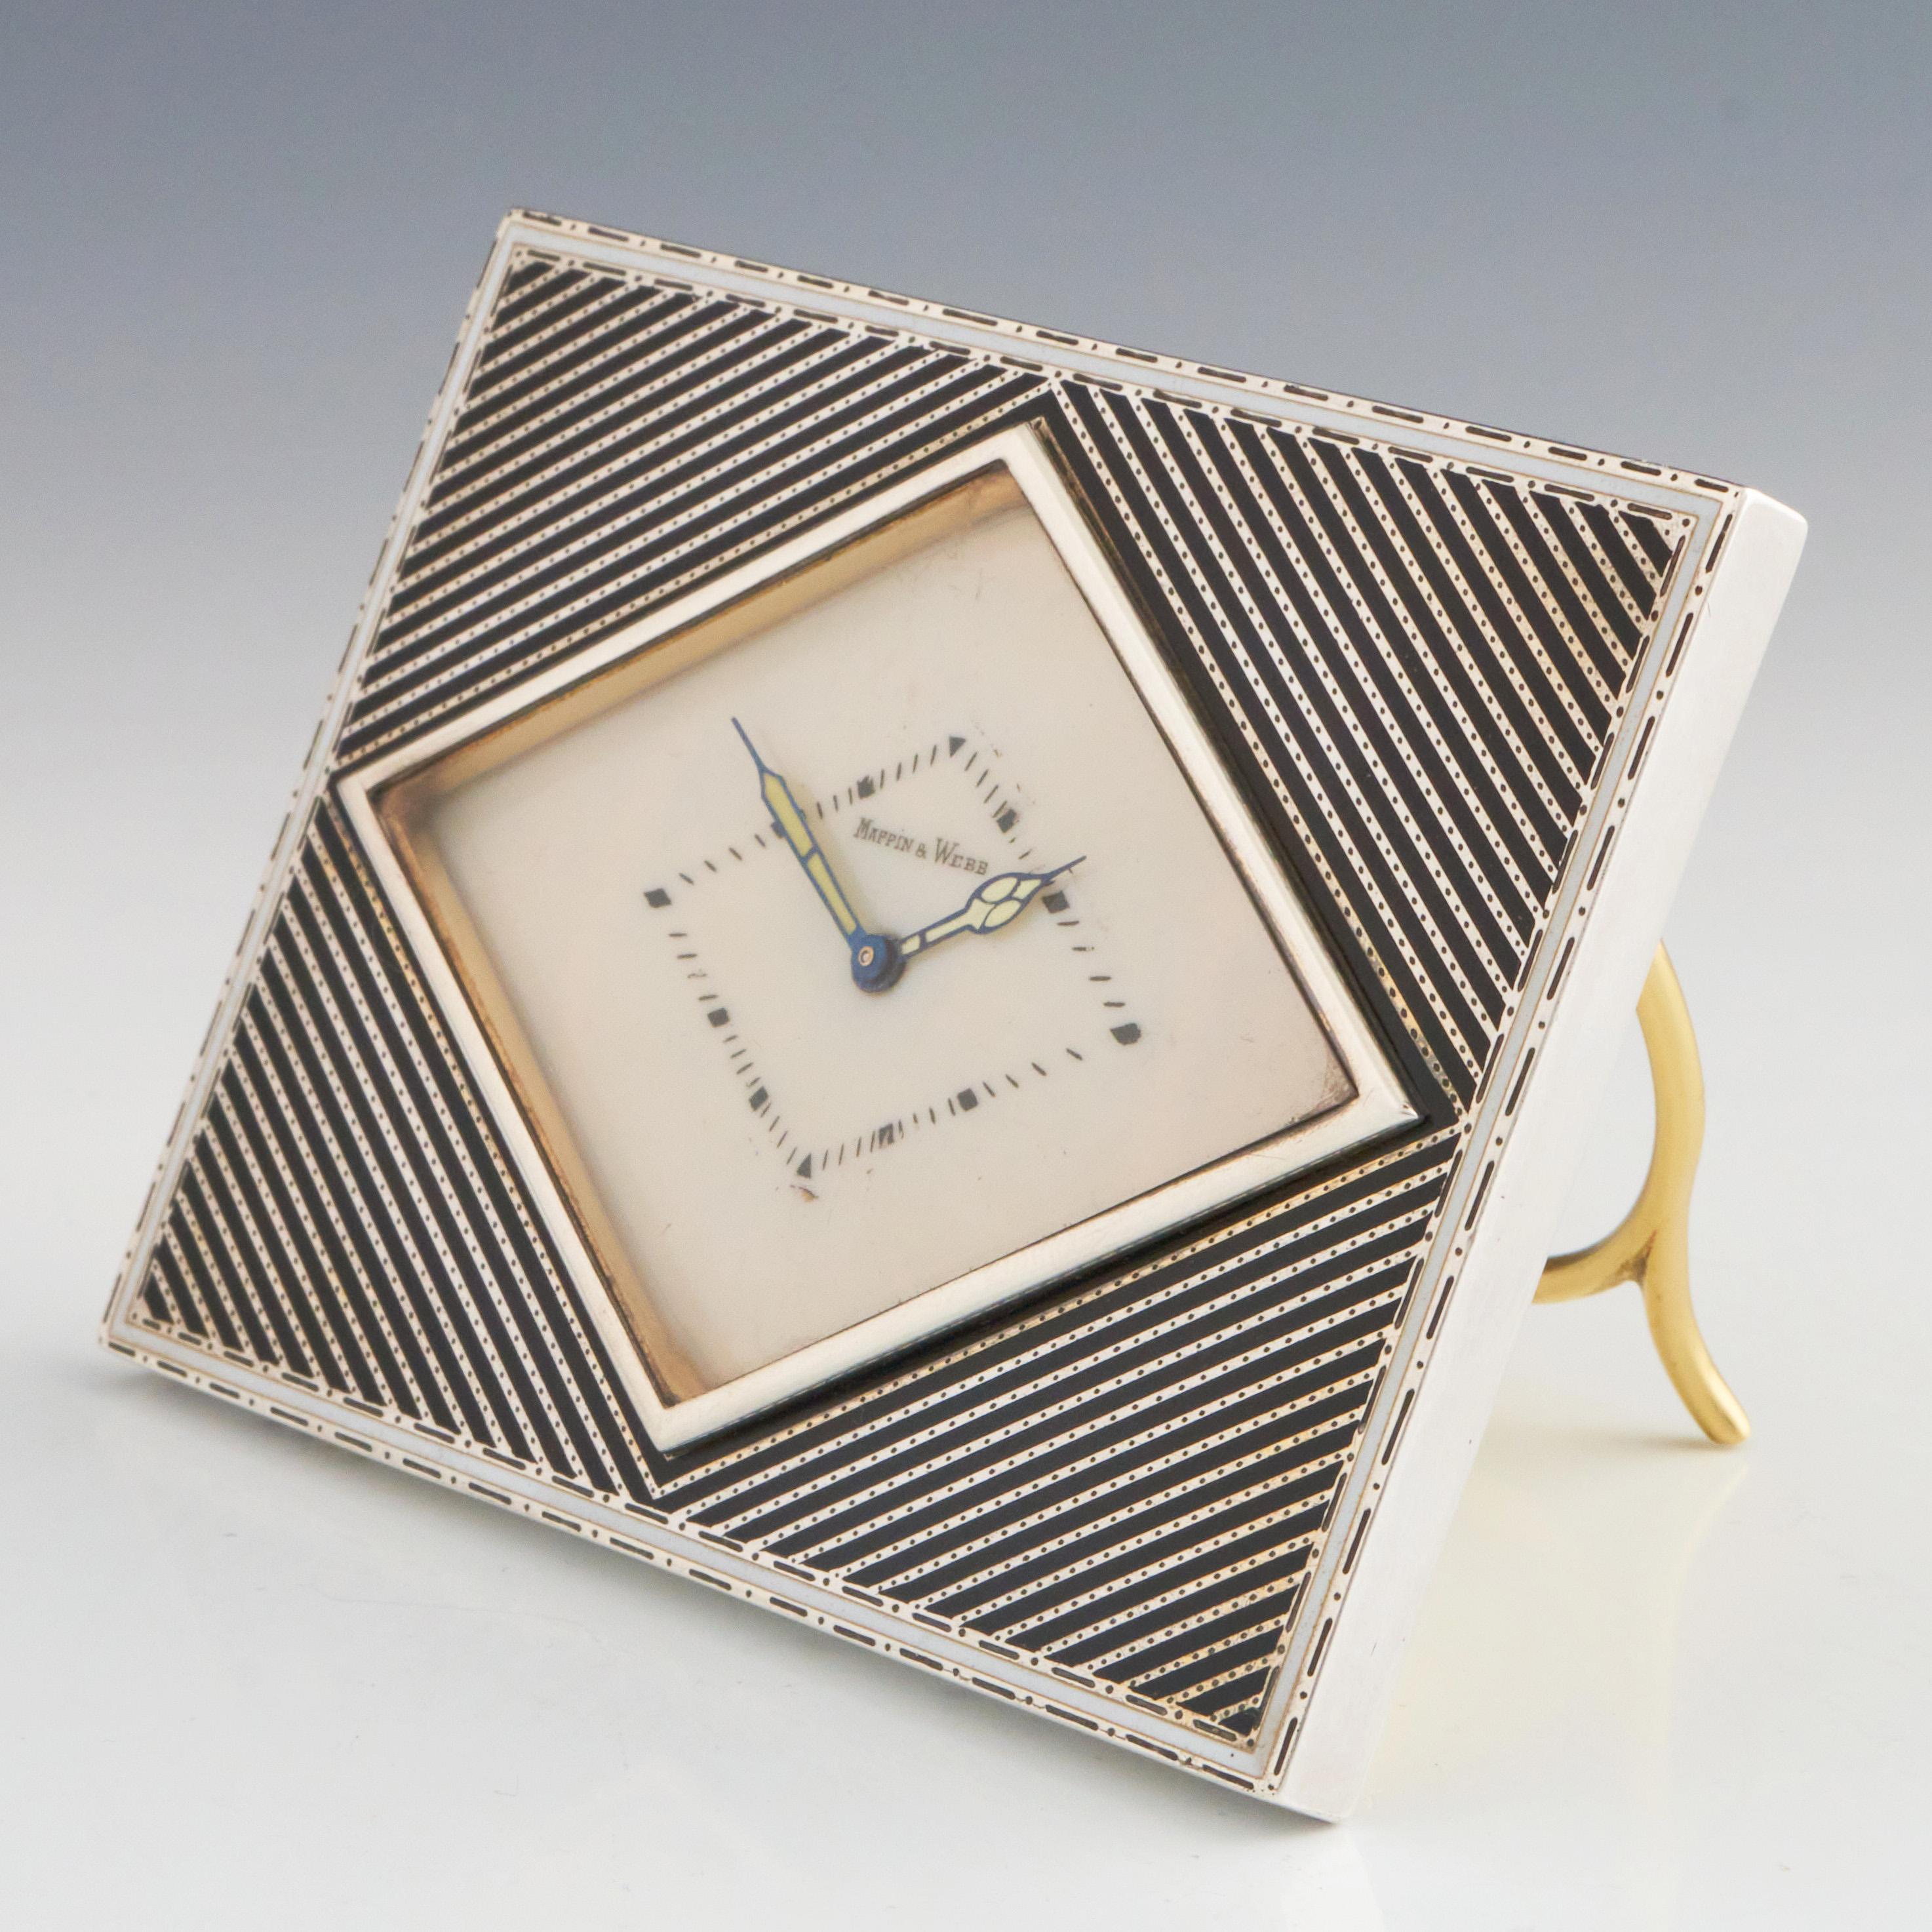 20th Century Vintage Swiss Made Art Deco Desk Clock Retailed by Mappin & Webb